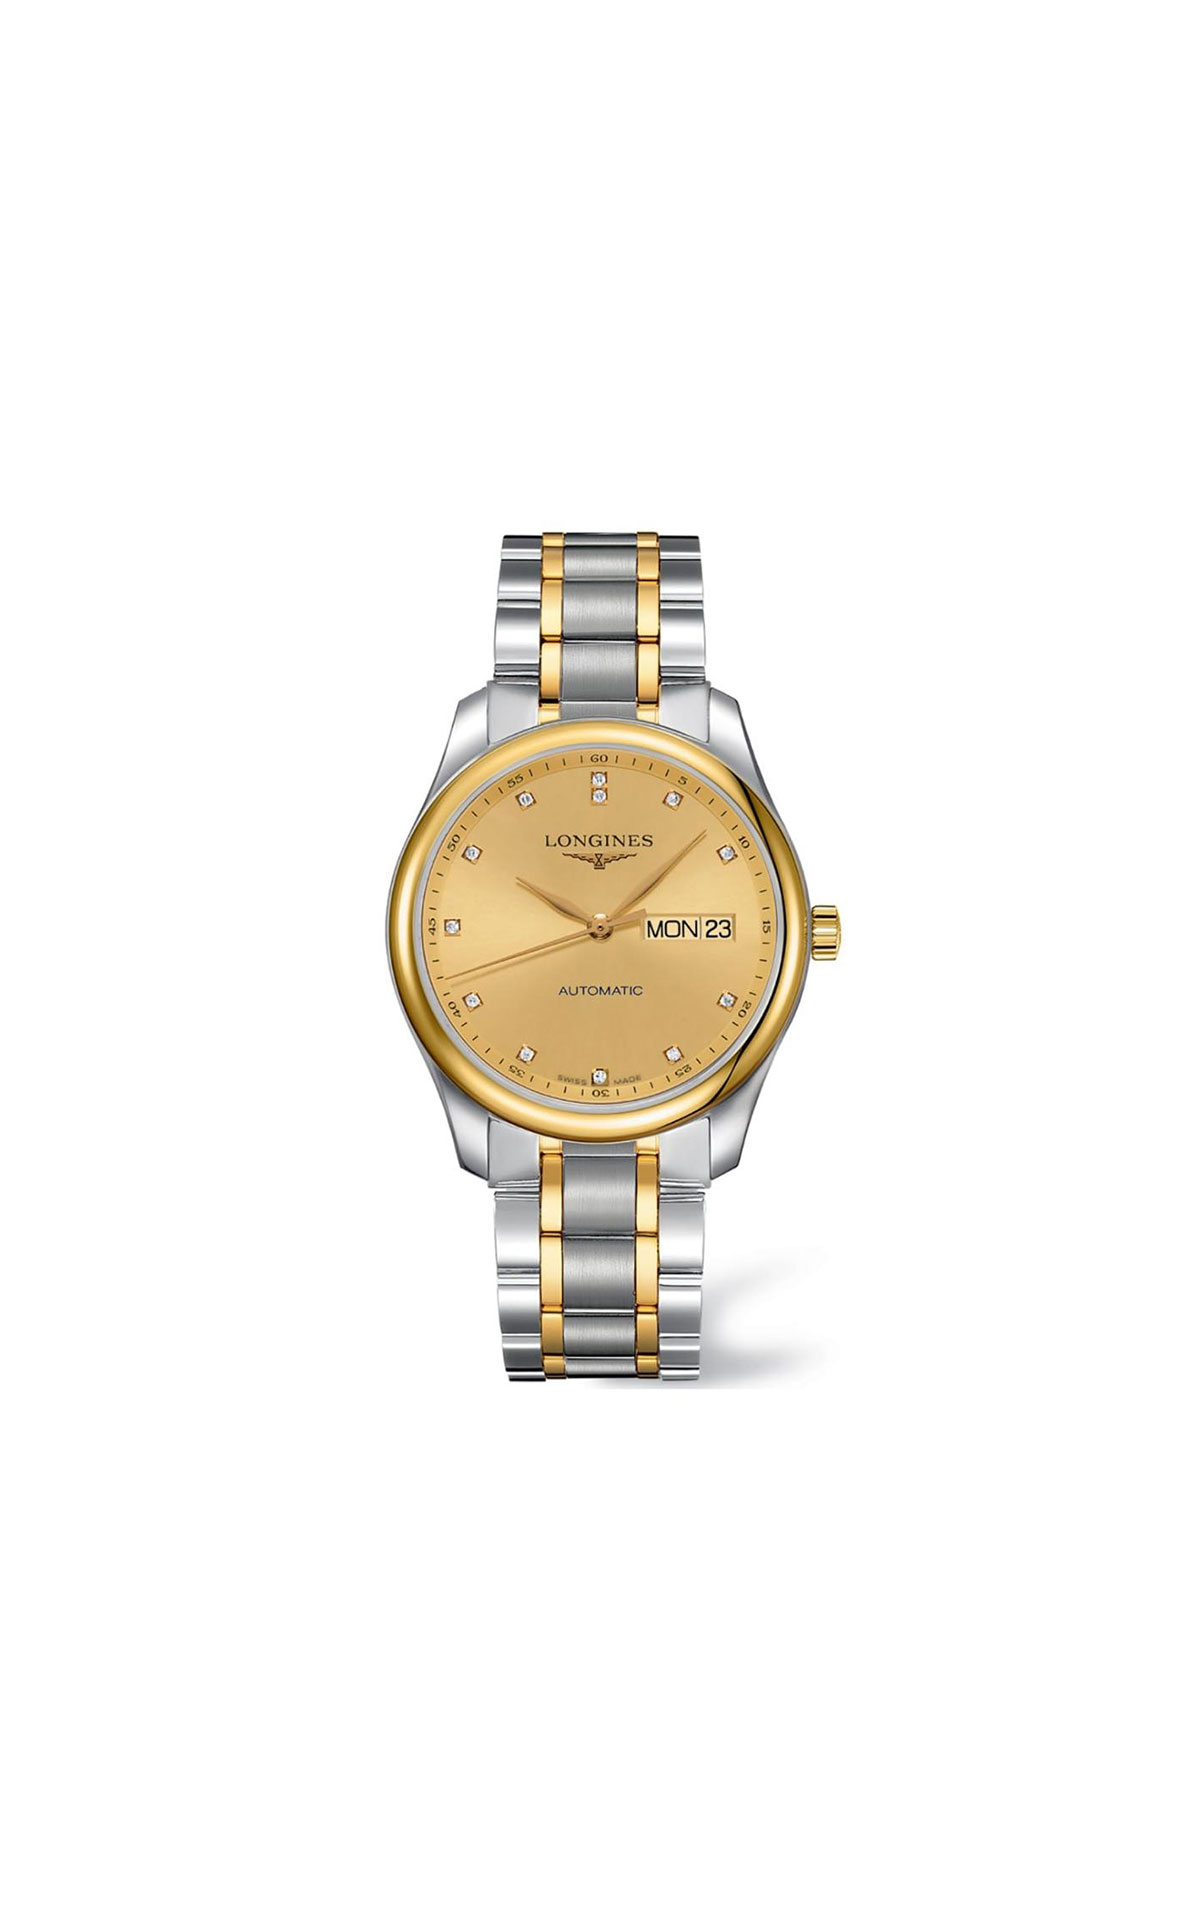 Hour Passion The longines master collection from Bicester Village